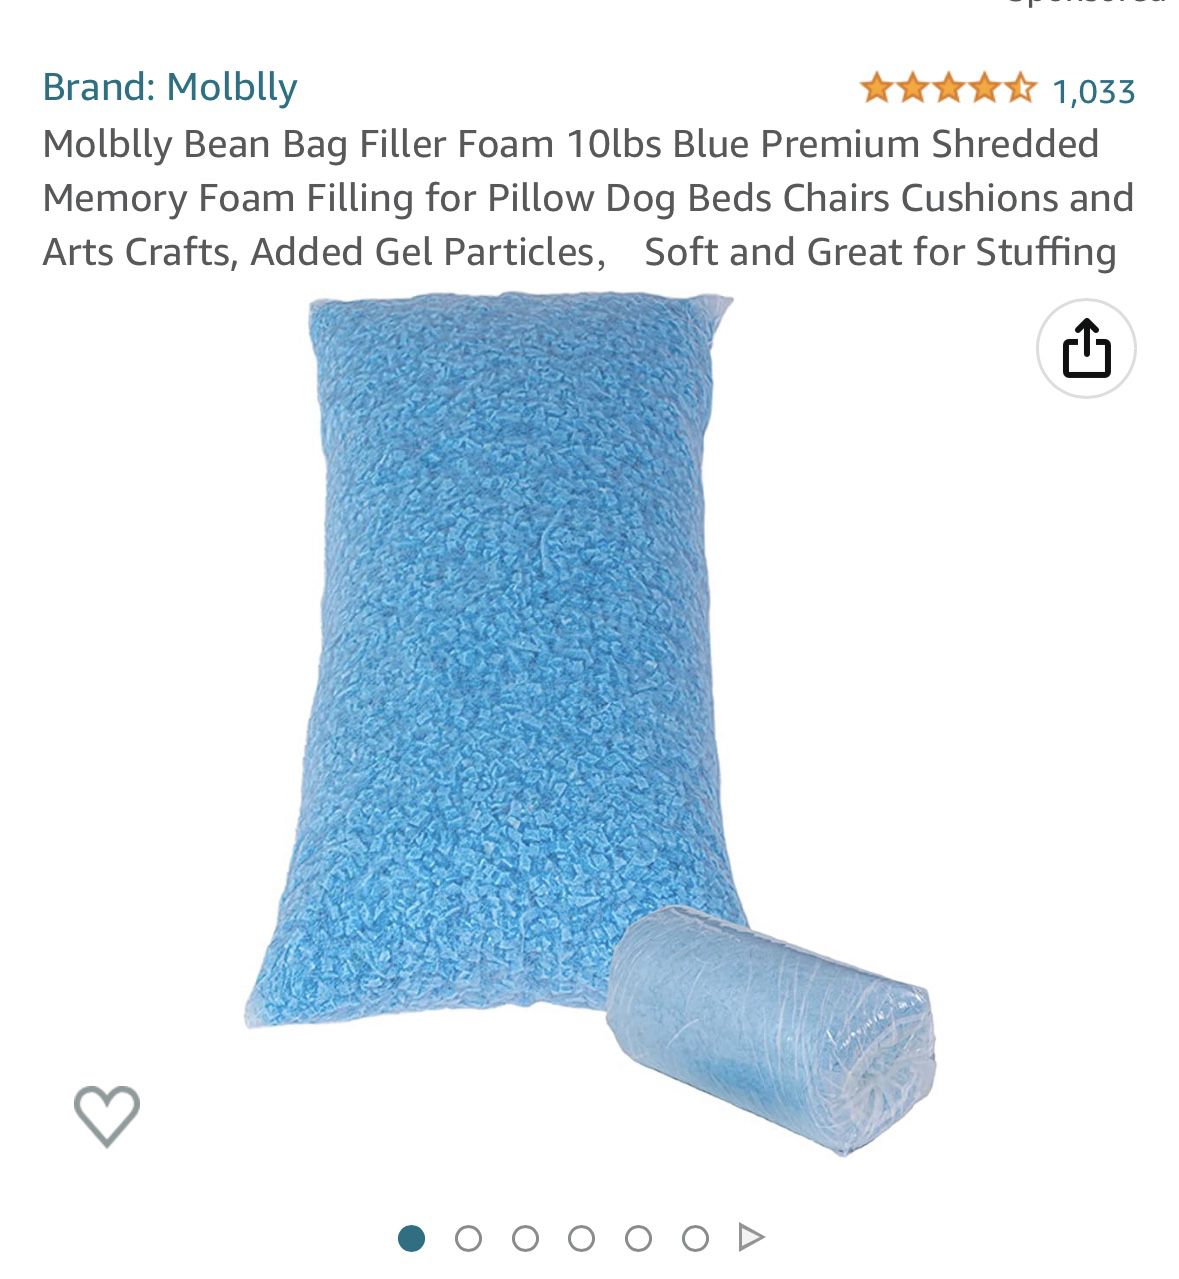 Molblly Bean Bag Filler Foam 20lbs Blue Premium Shredded Memory Foam  Filling for Pillow Dog Beds Chairs Cushions and Arts Crafts, Added Gel  Particles ， Soft and Great for Stuffing : 